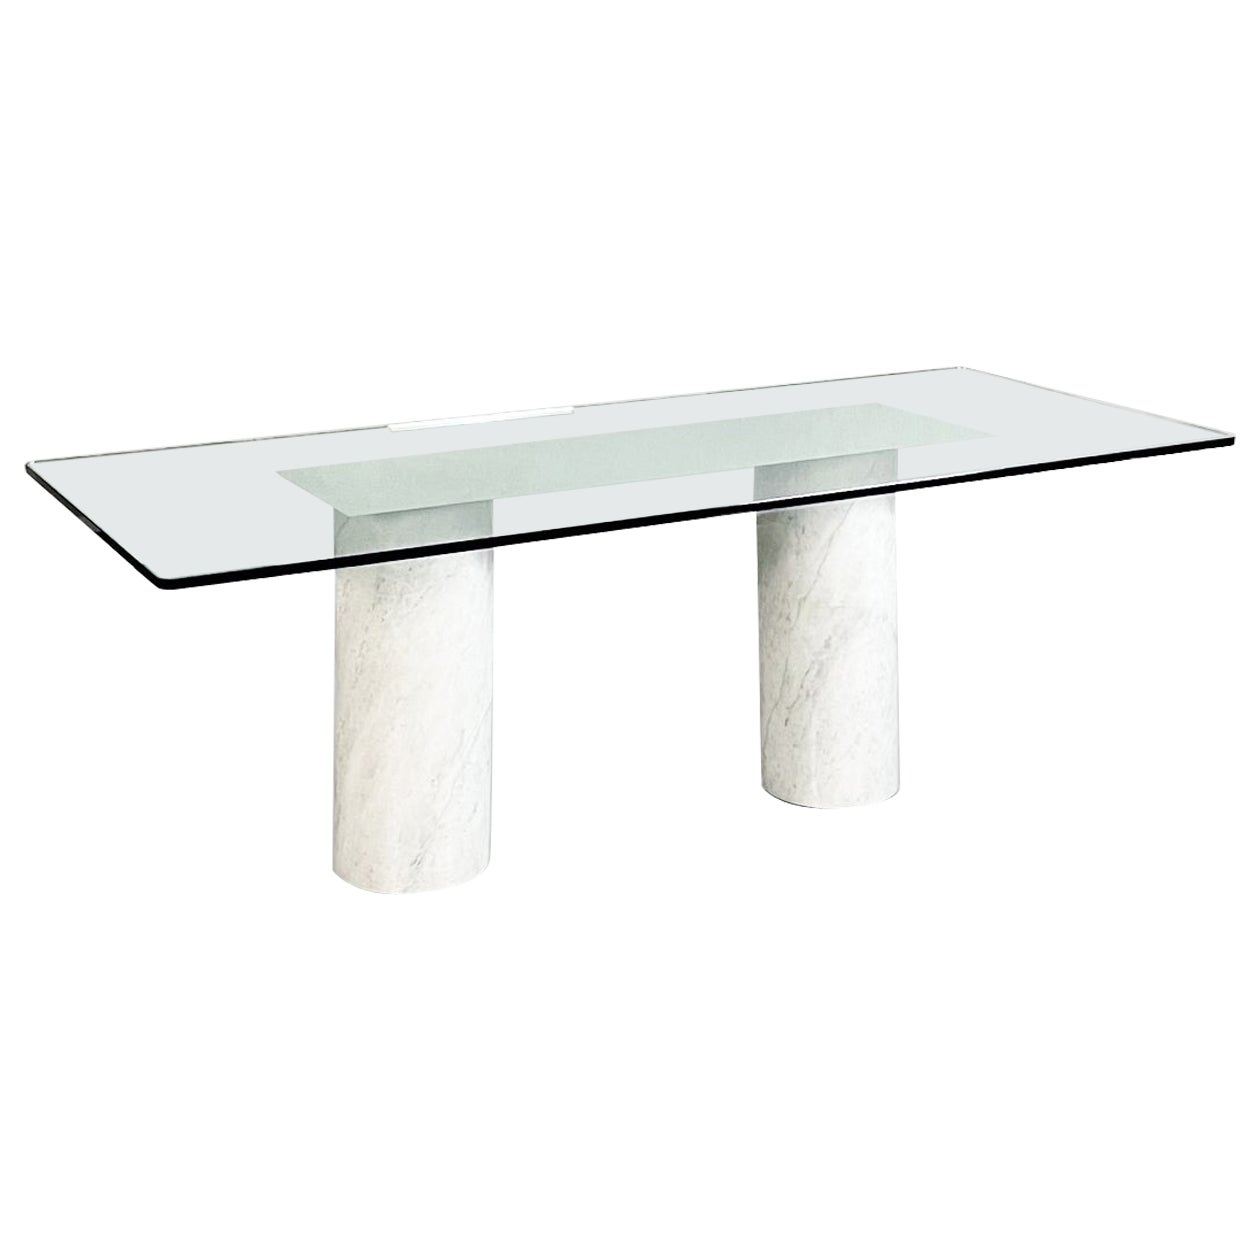 Italian Mid-Century Rectangular Dining Table in Glass, Mirror and Marble, 1980s